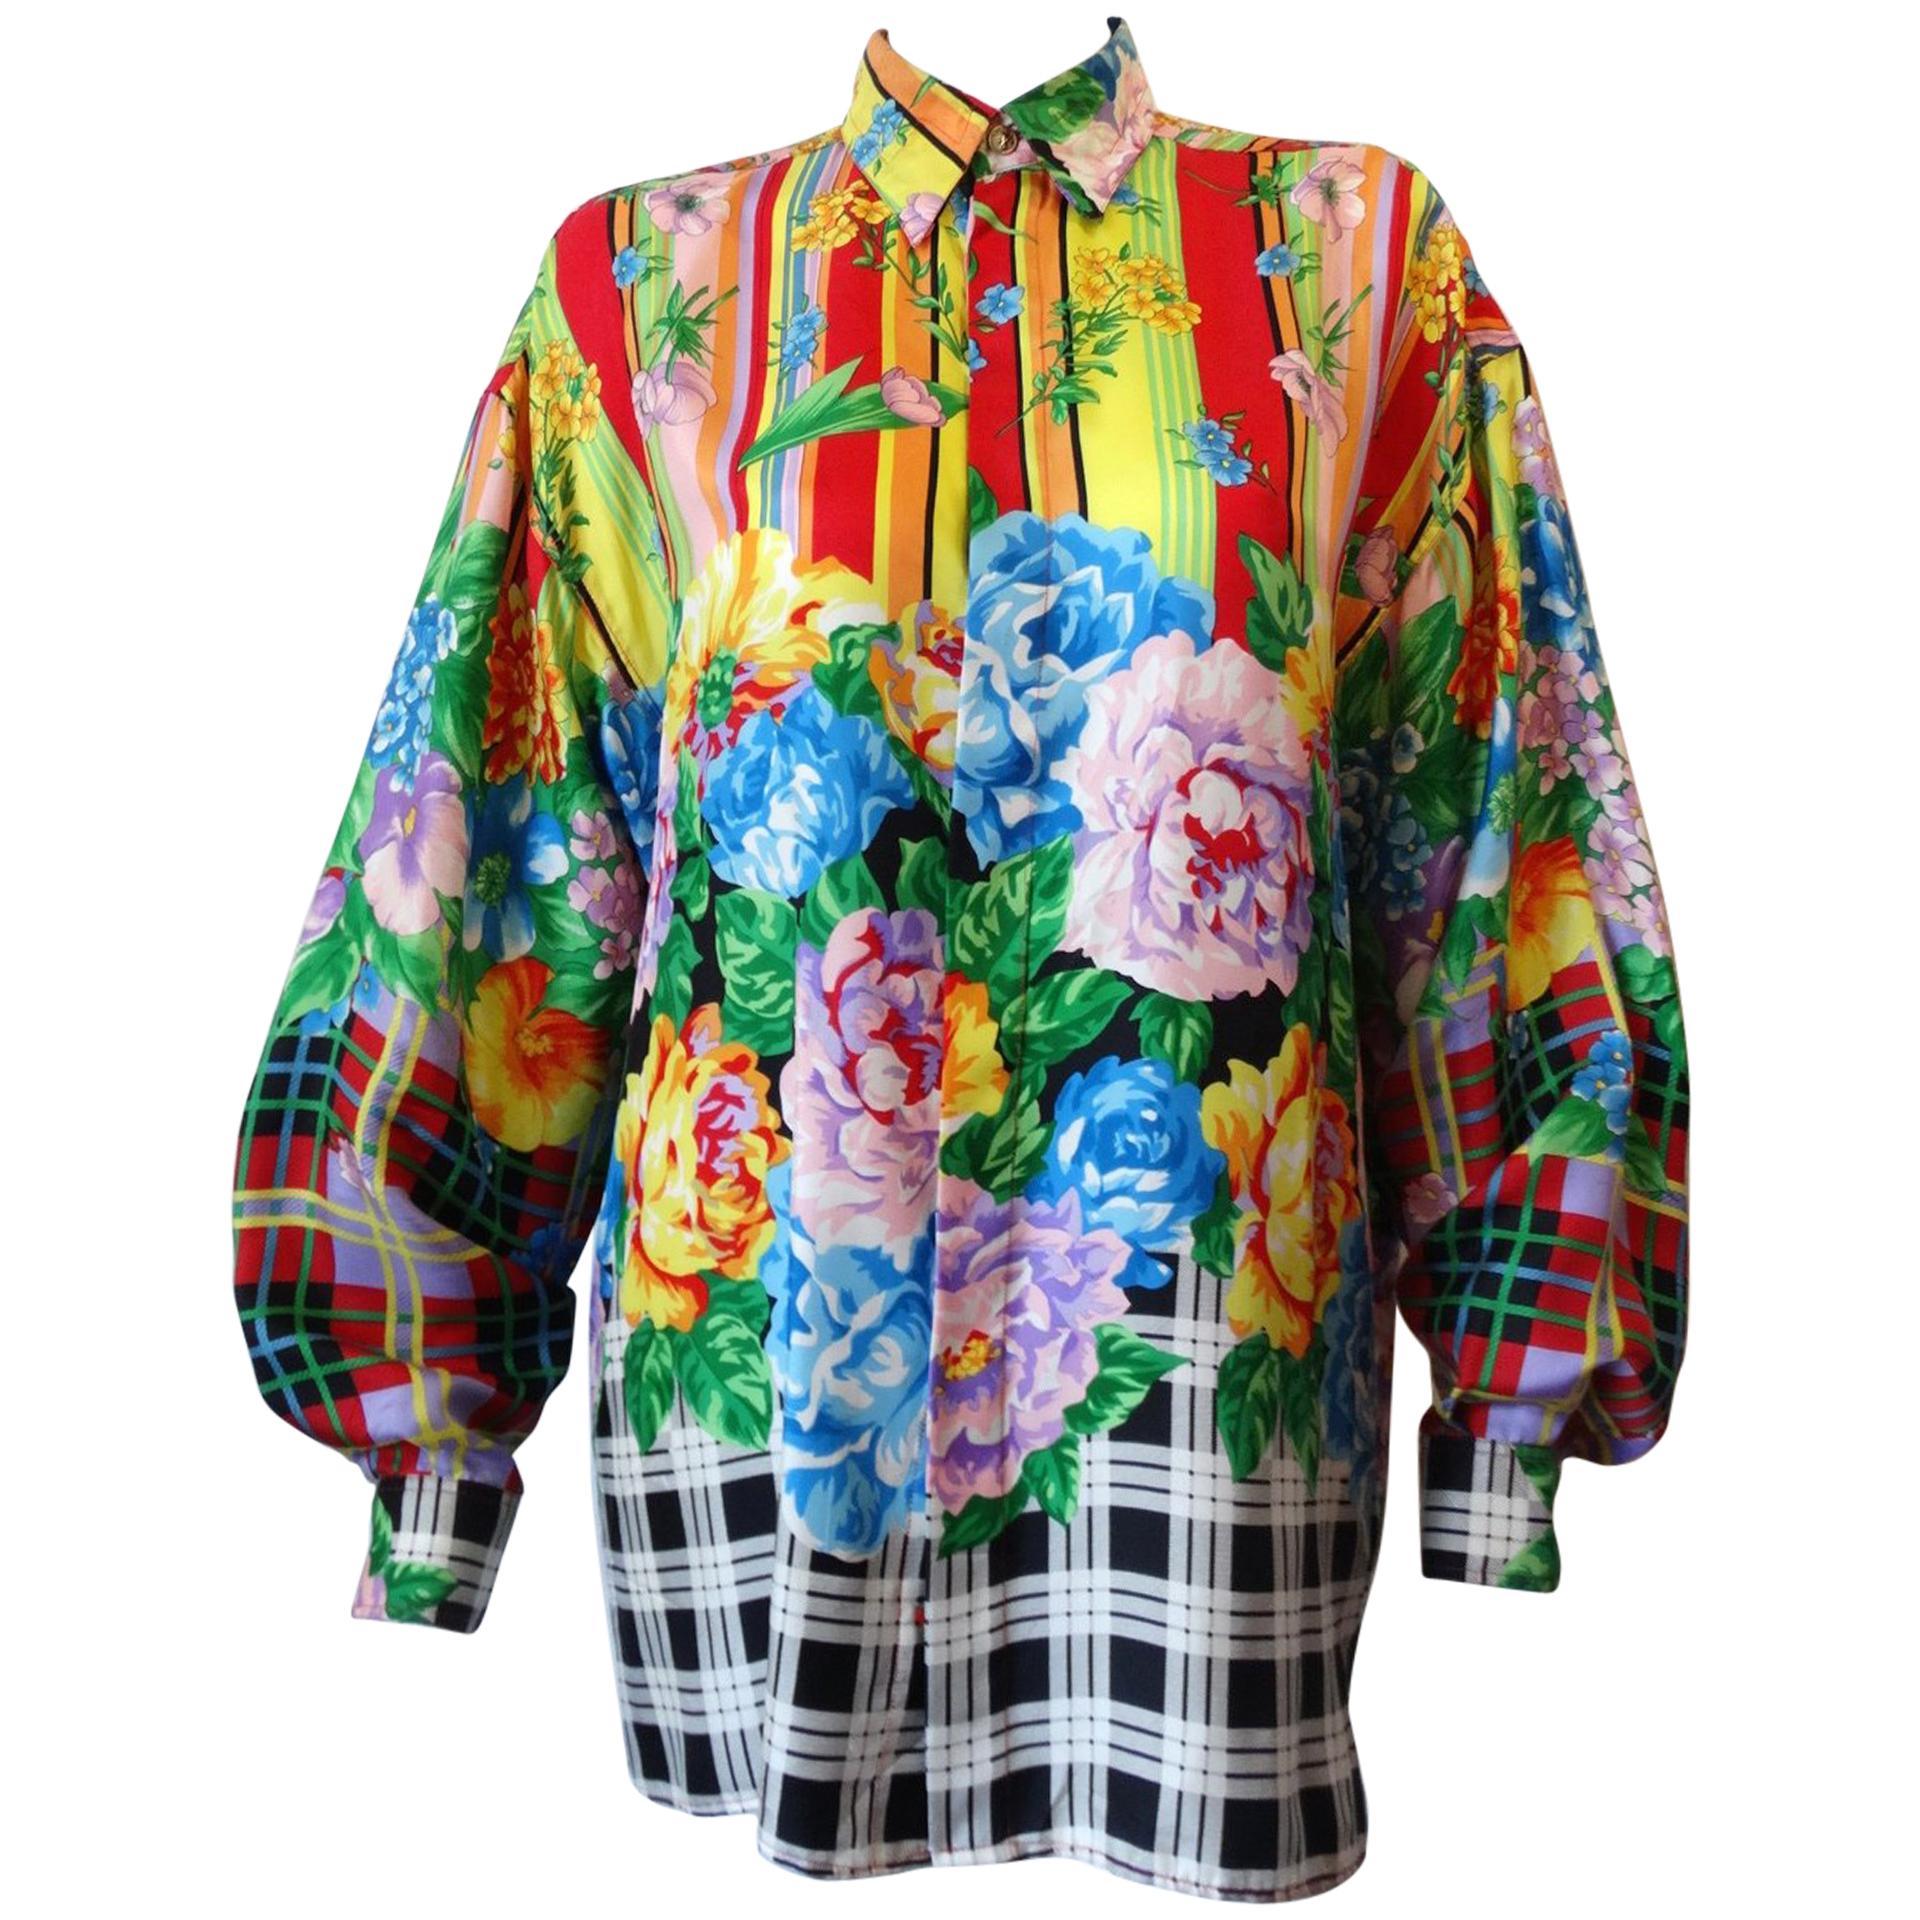 Gianni Versace Multicolored Silk Floral Shirt 